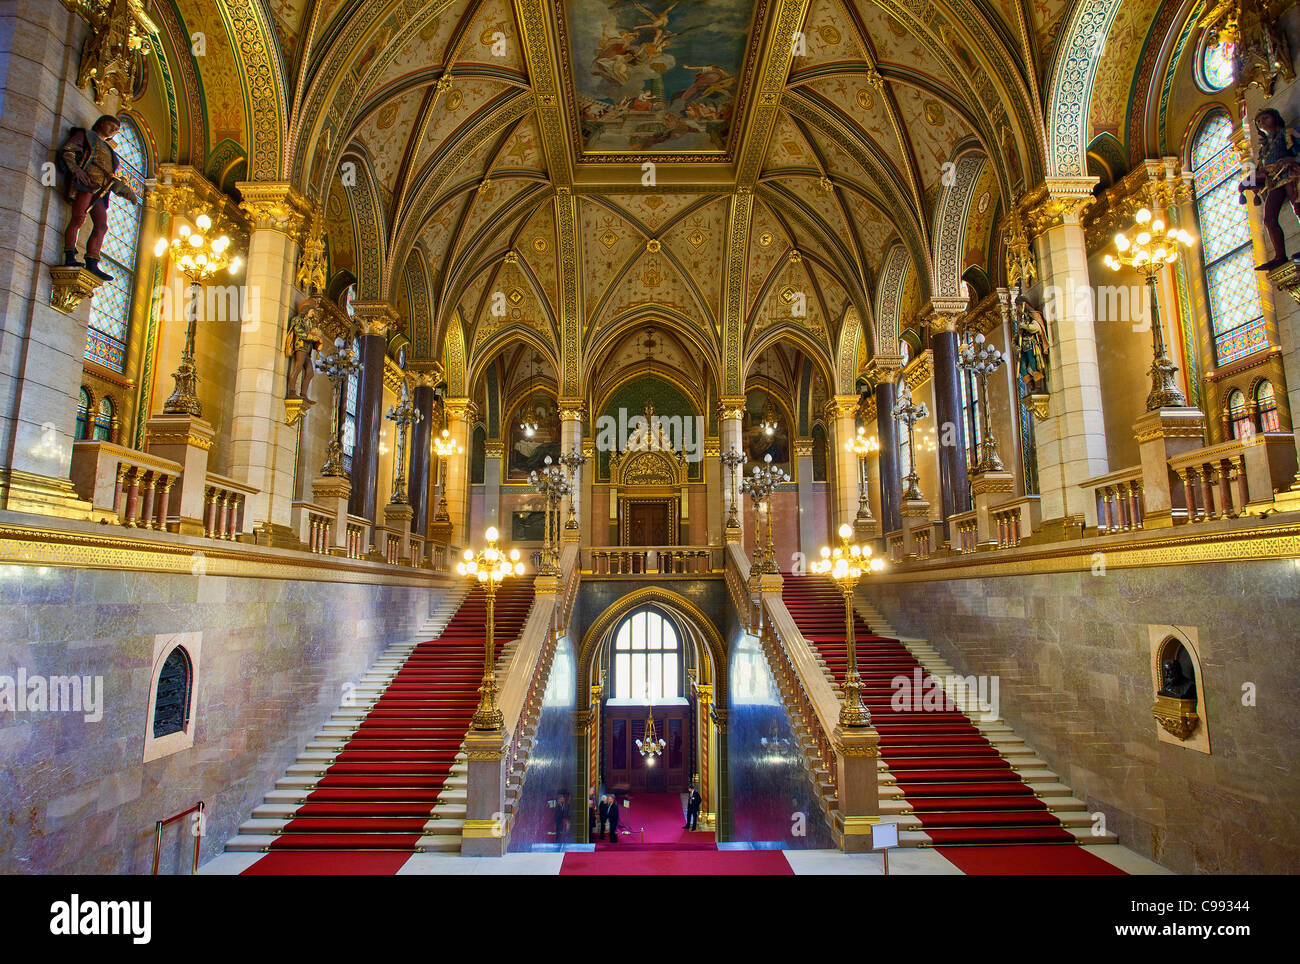 Budapest, Hungarian Parliament Building, Interior View of Stairway of Parliament Building Stock Photo